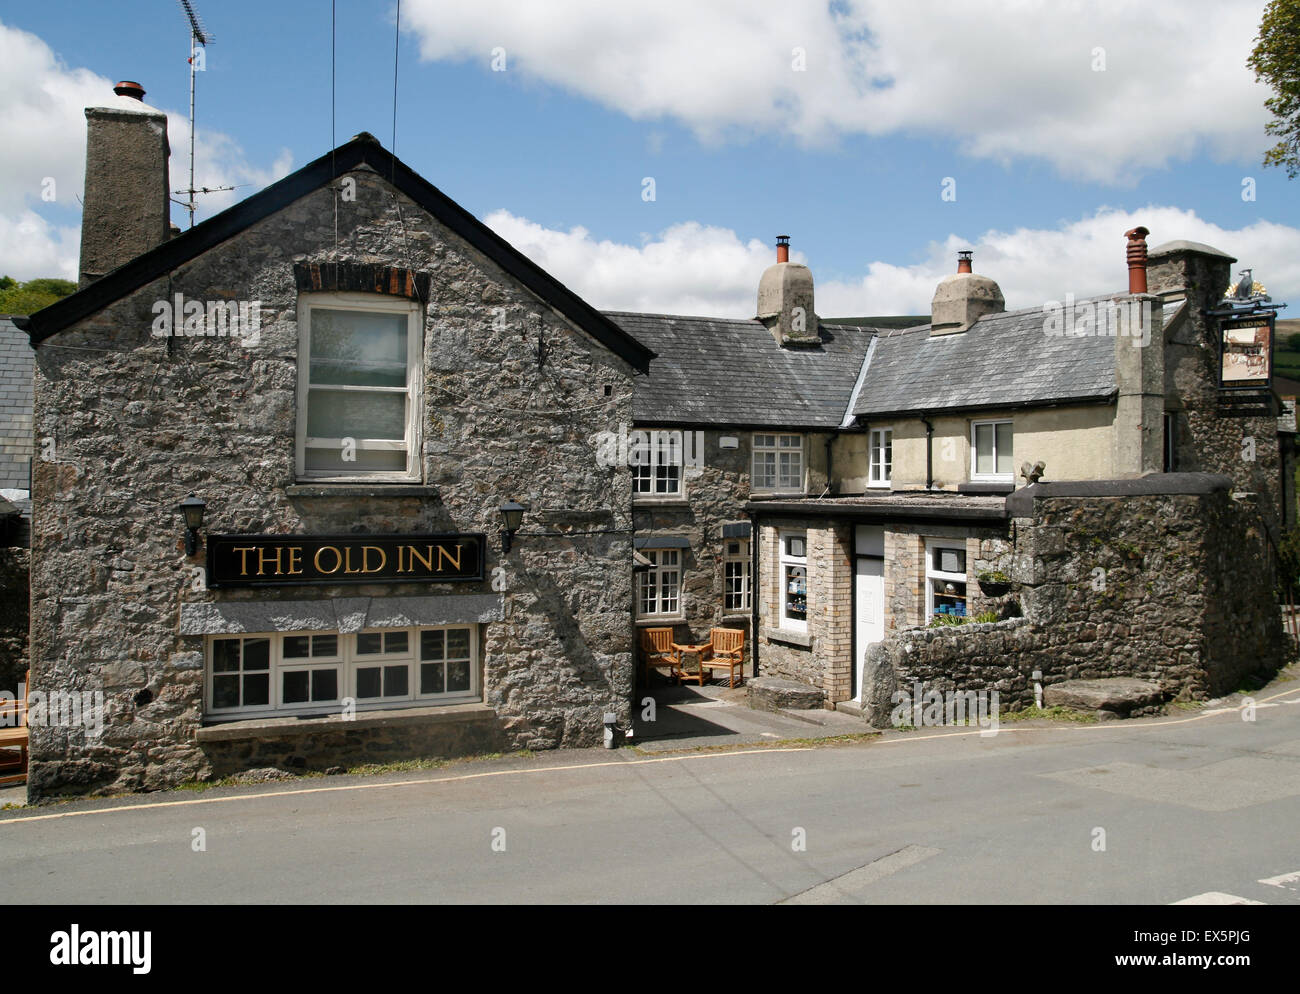 The Old Inn  Widecombe in the Moor  Devon England UK Stock Photo